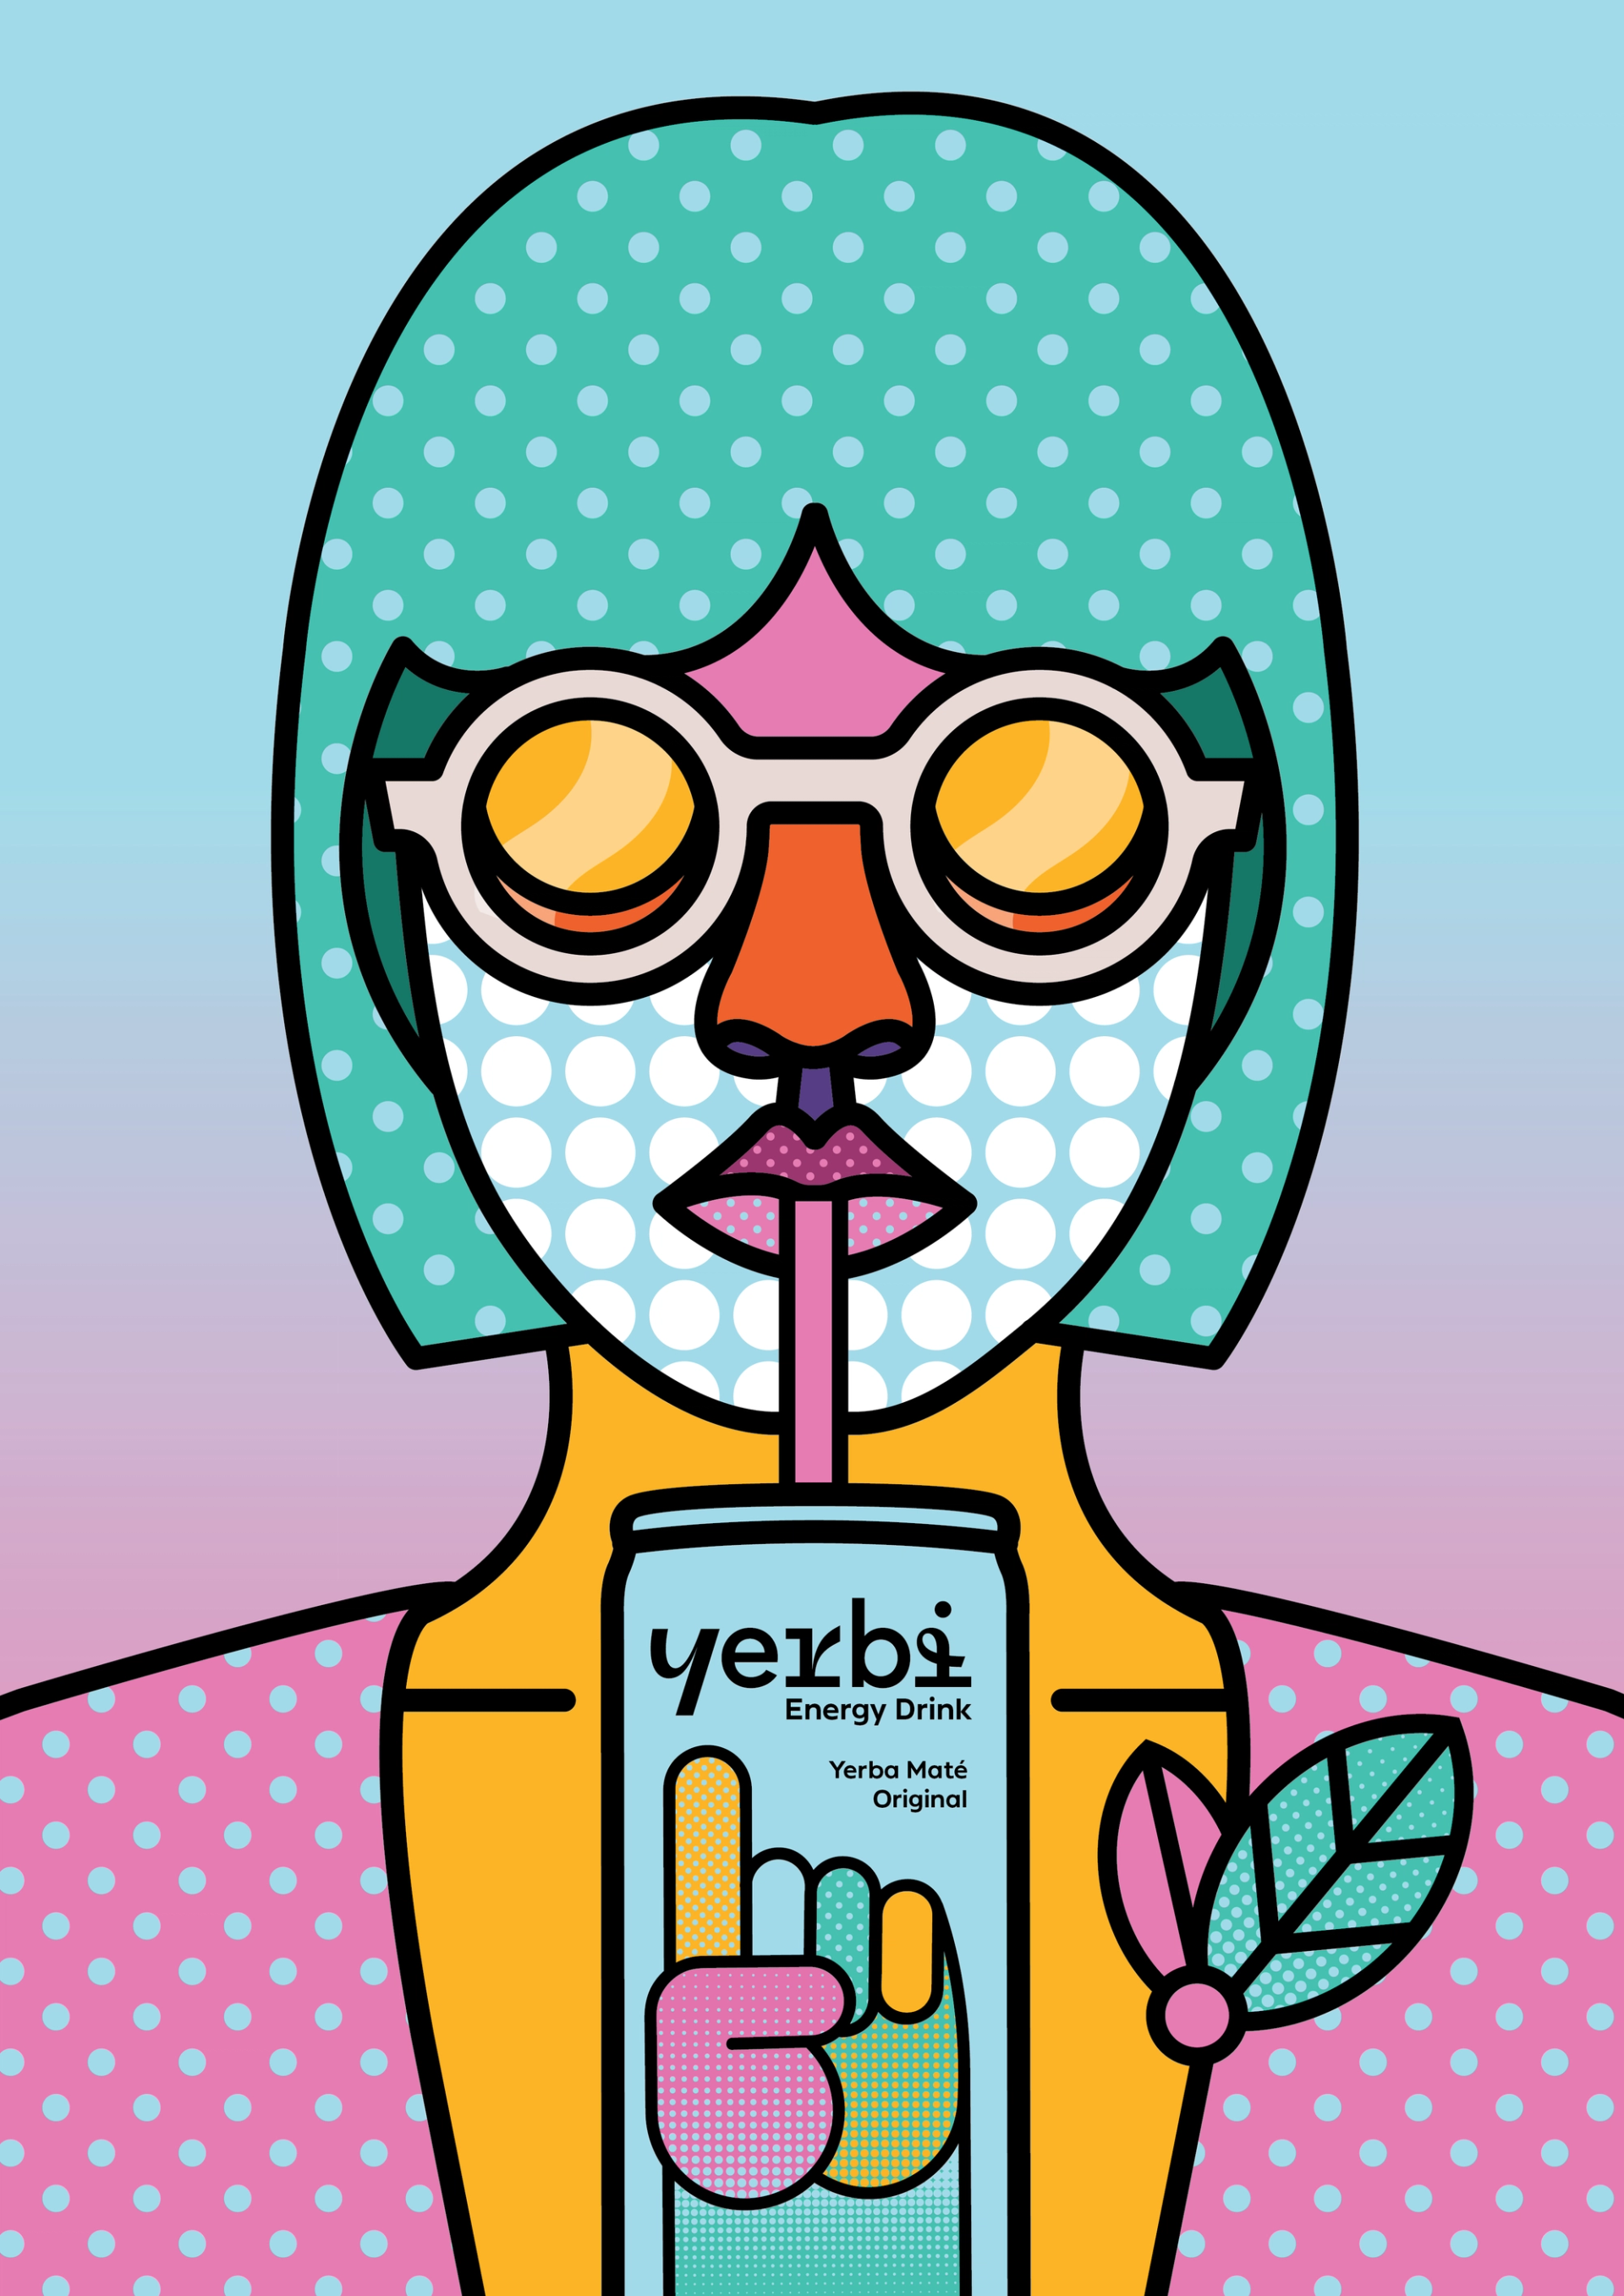 Colourful pop art illustration by London branding agency Our Revolution for contemporary energy drink brand Yerbi